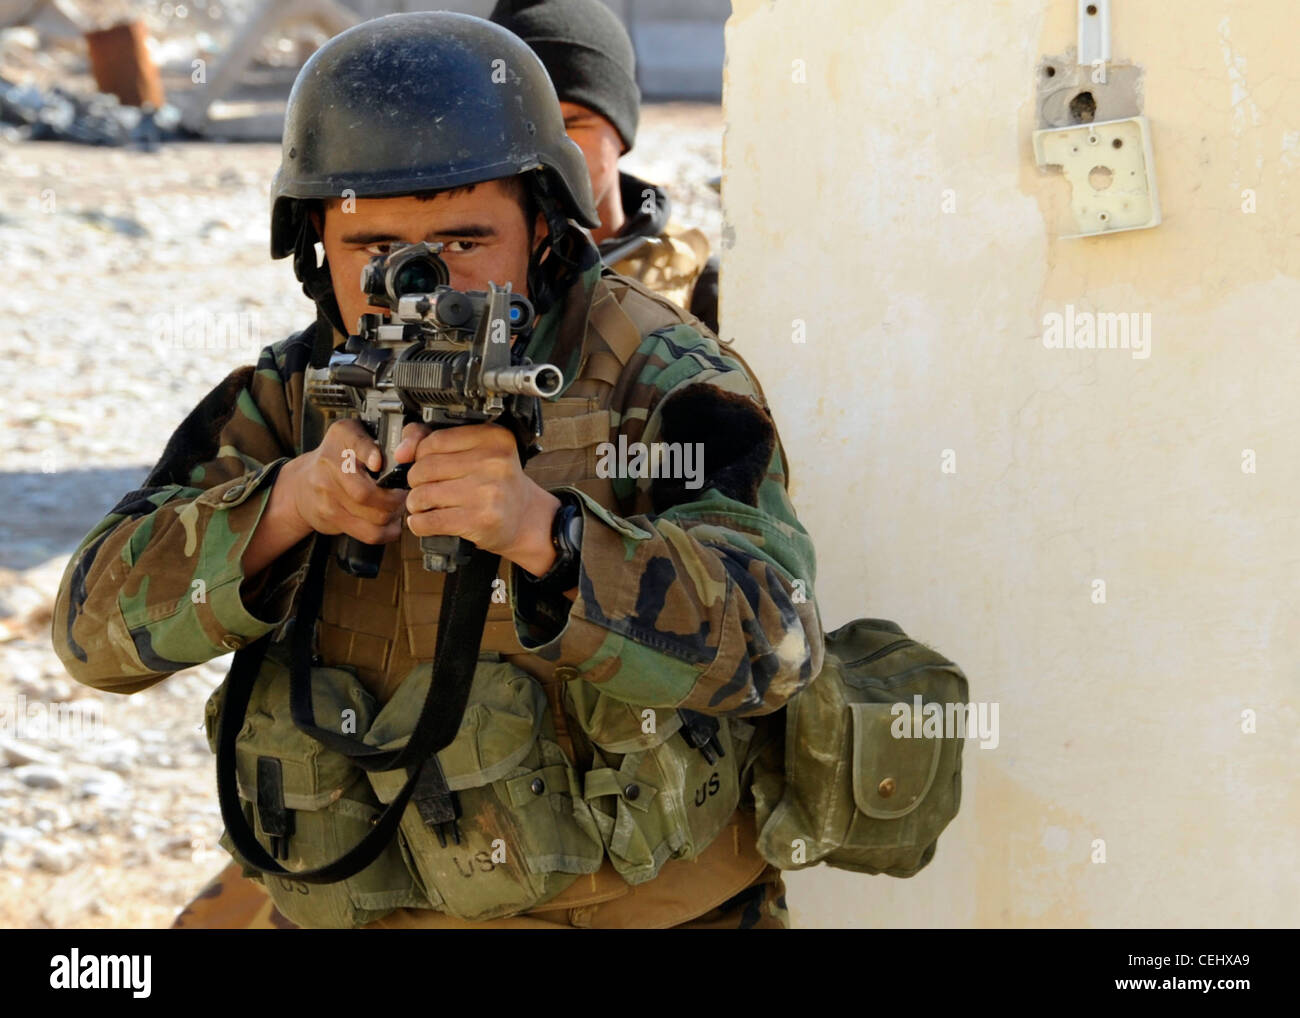 A soldier from the 8th Commando Kandak clears a room during a training exercise in Tarin Kowt district, Uruzgan province, Afghanistan, Feb. 14. The 8th Commando Kandak partners with coalition Special Operations Forces to conduct operations throughout Uruzgan and Zabul provinces. Stock Photo